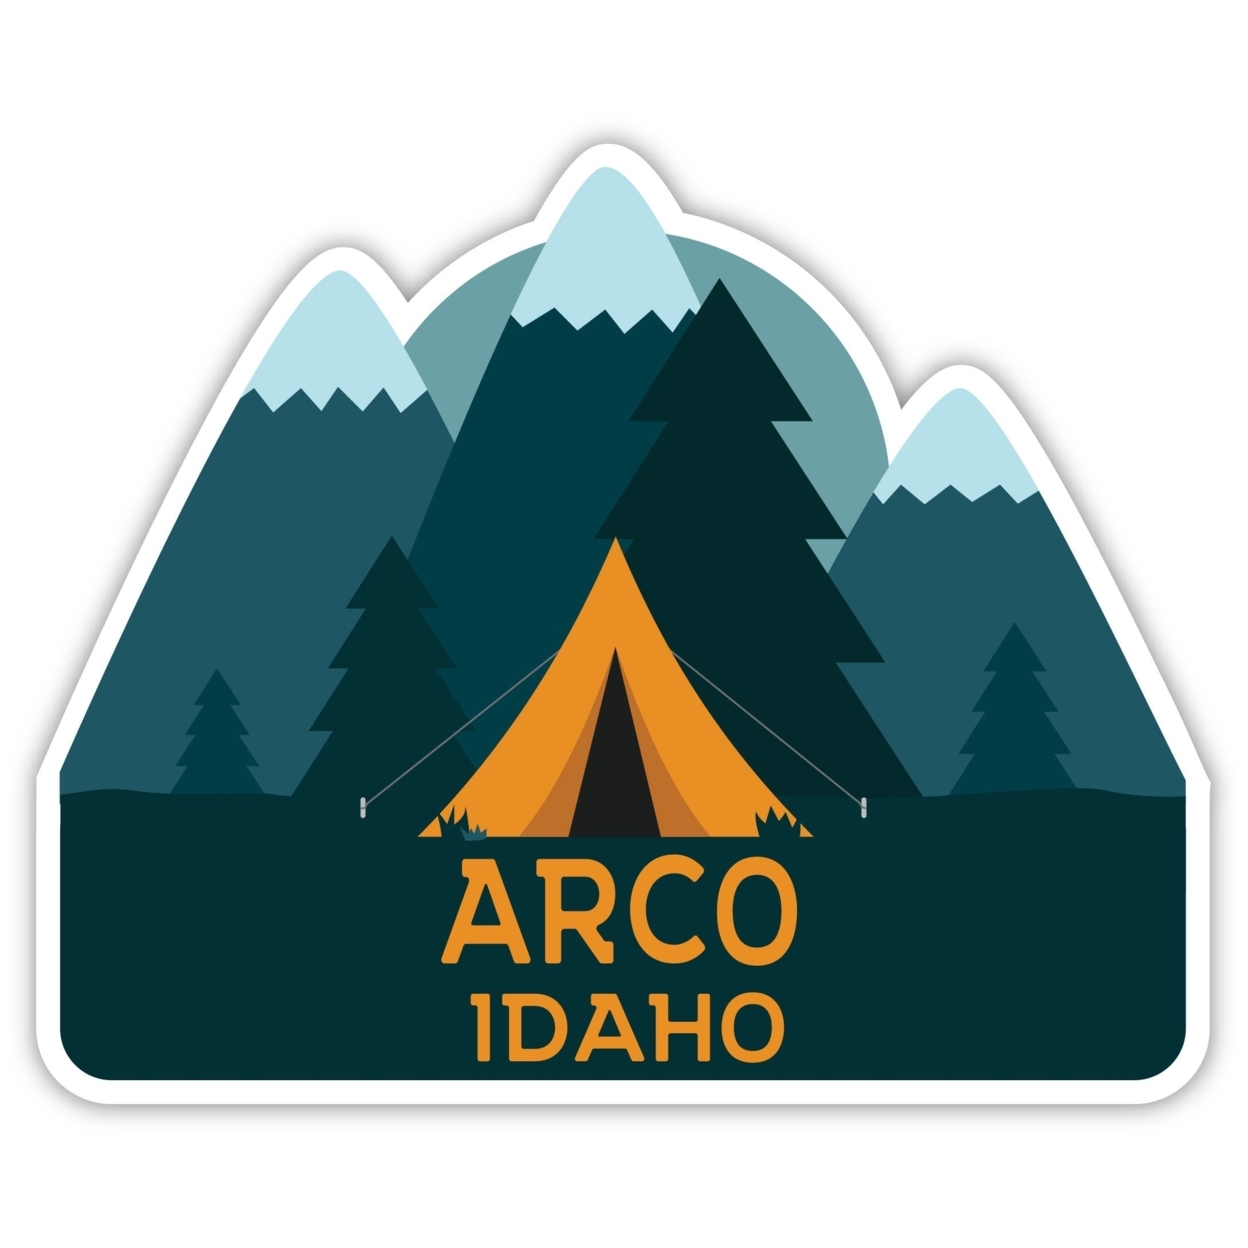 Arco Idaho Souvenir Decorative Stickers (Choose Theme And Size) - 4-Pack, 2-Inch, Tent